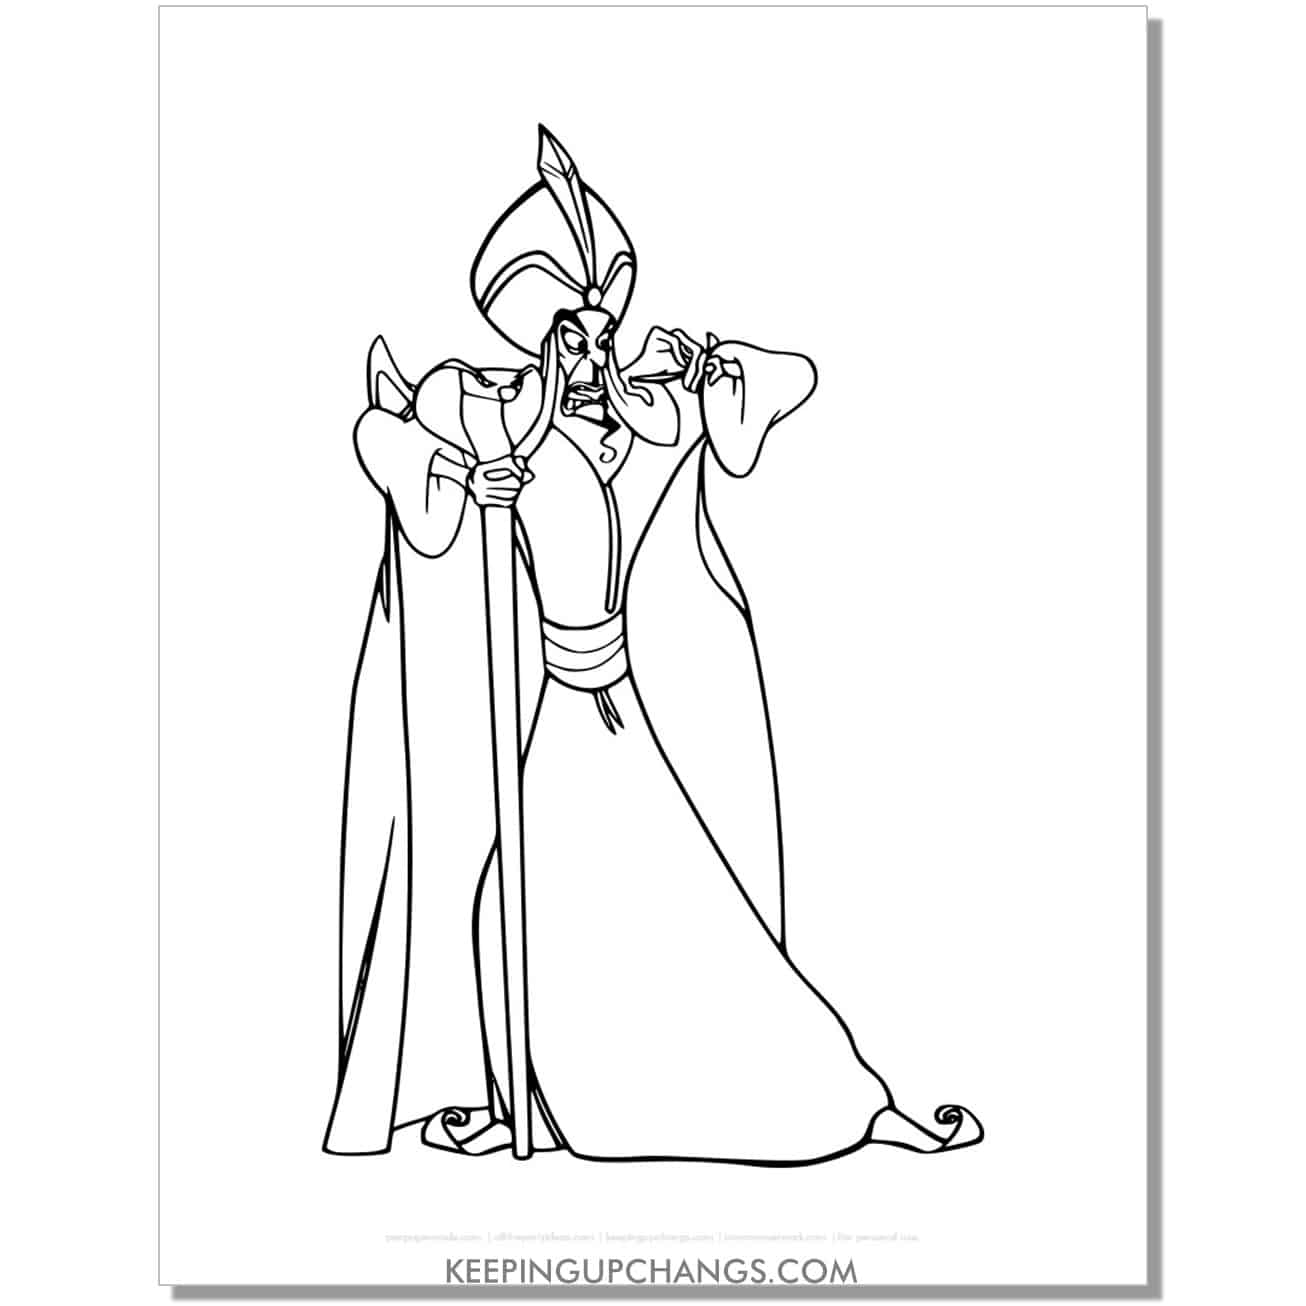 aladdin jafar with foot out coloring page, sheet.